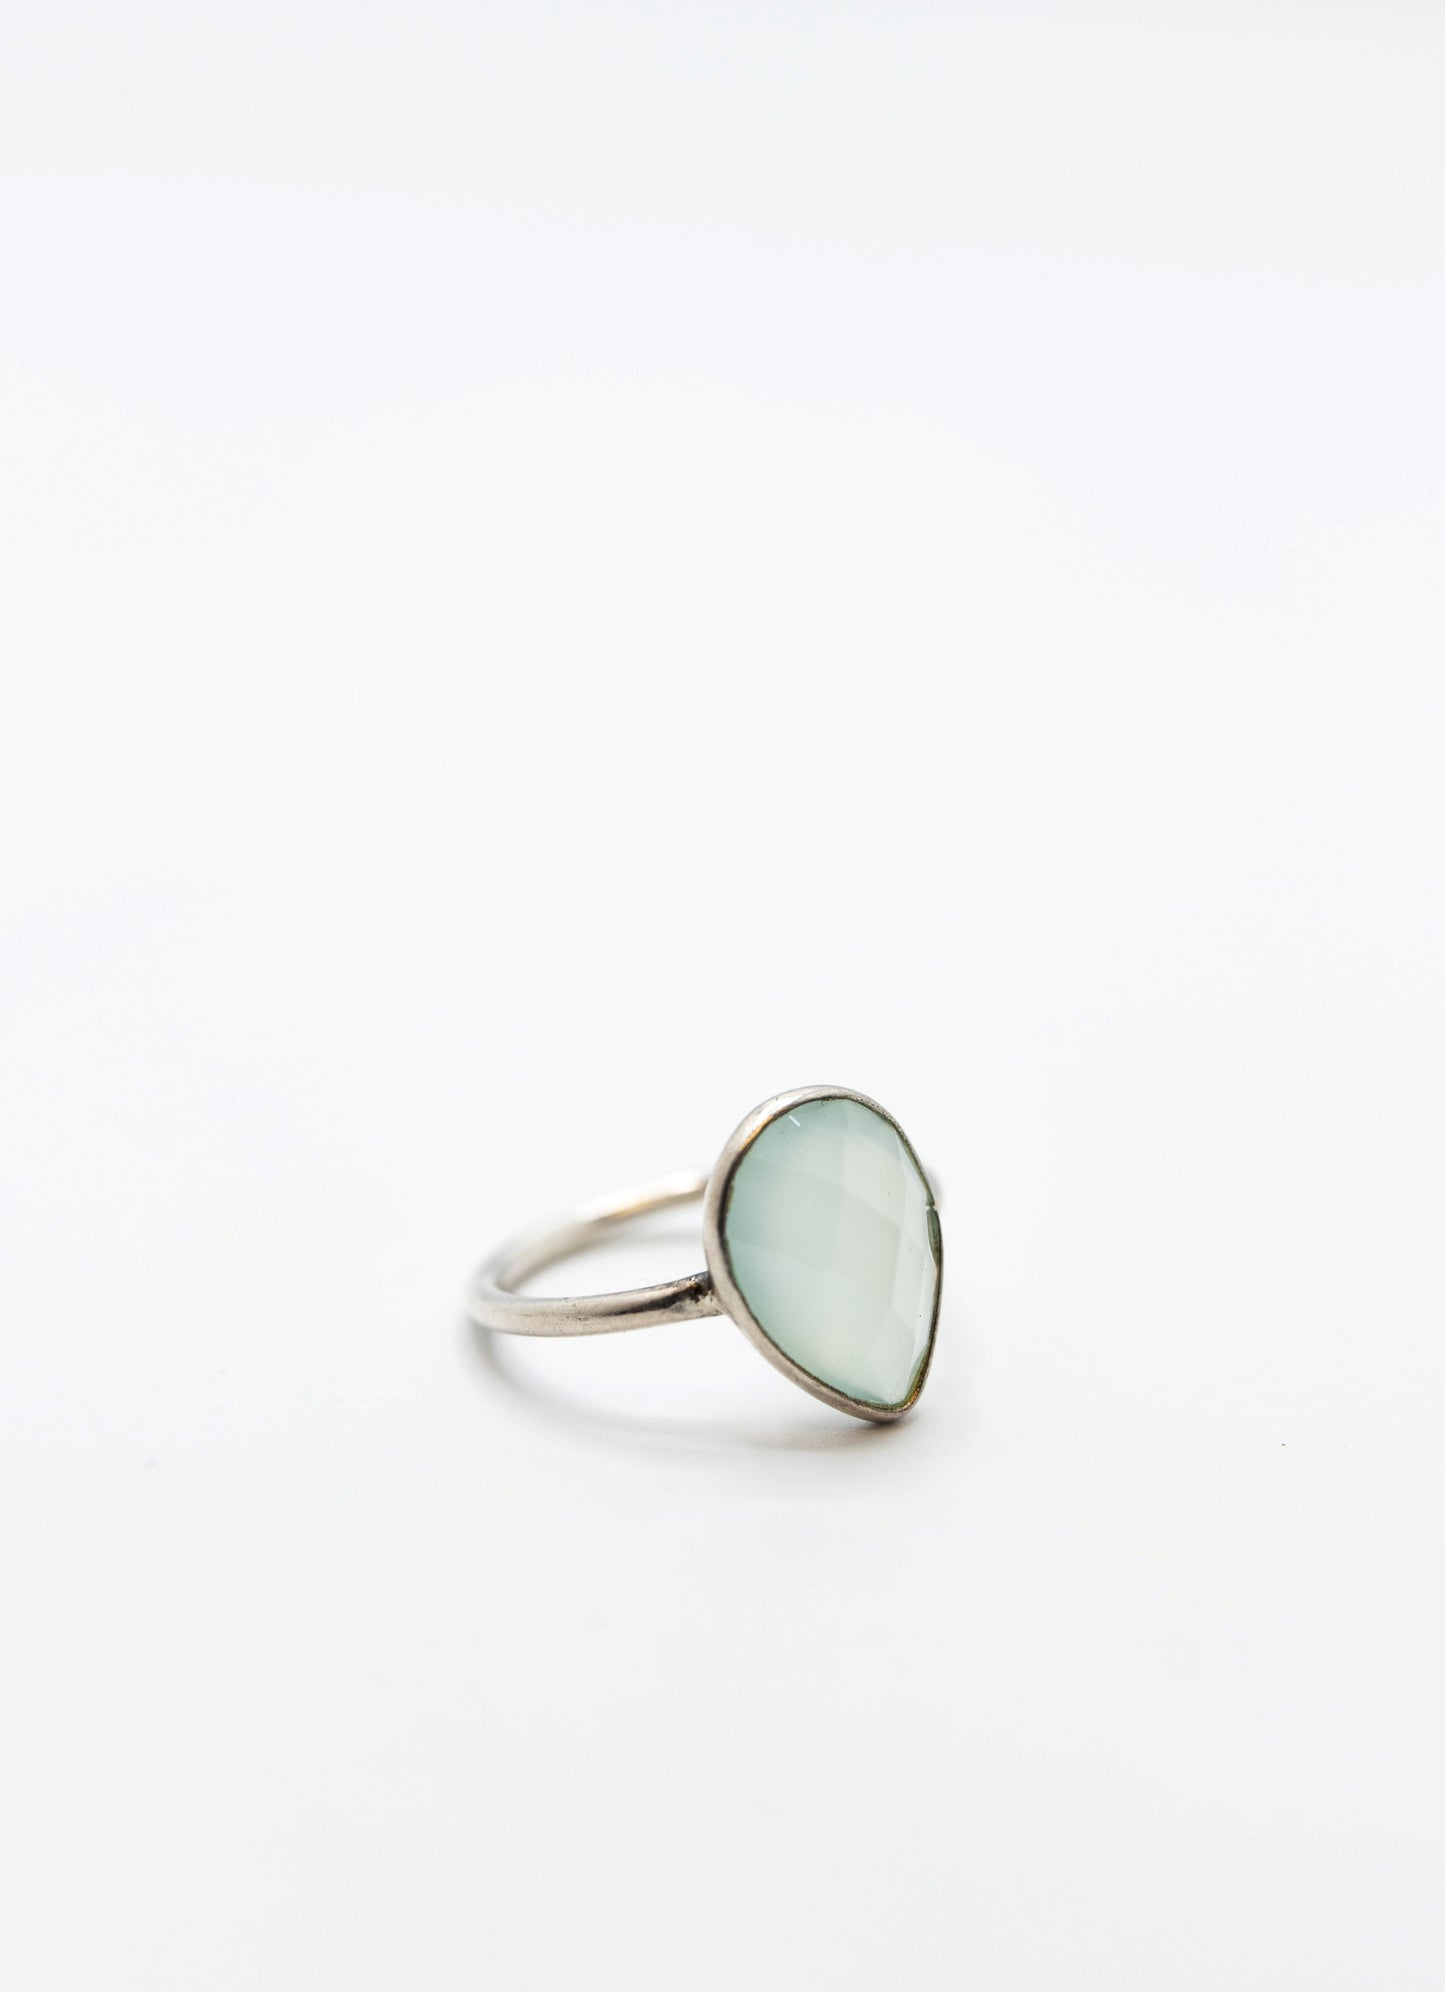 Faceted Aquamarine .925 Ring Teardrop Small